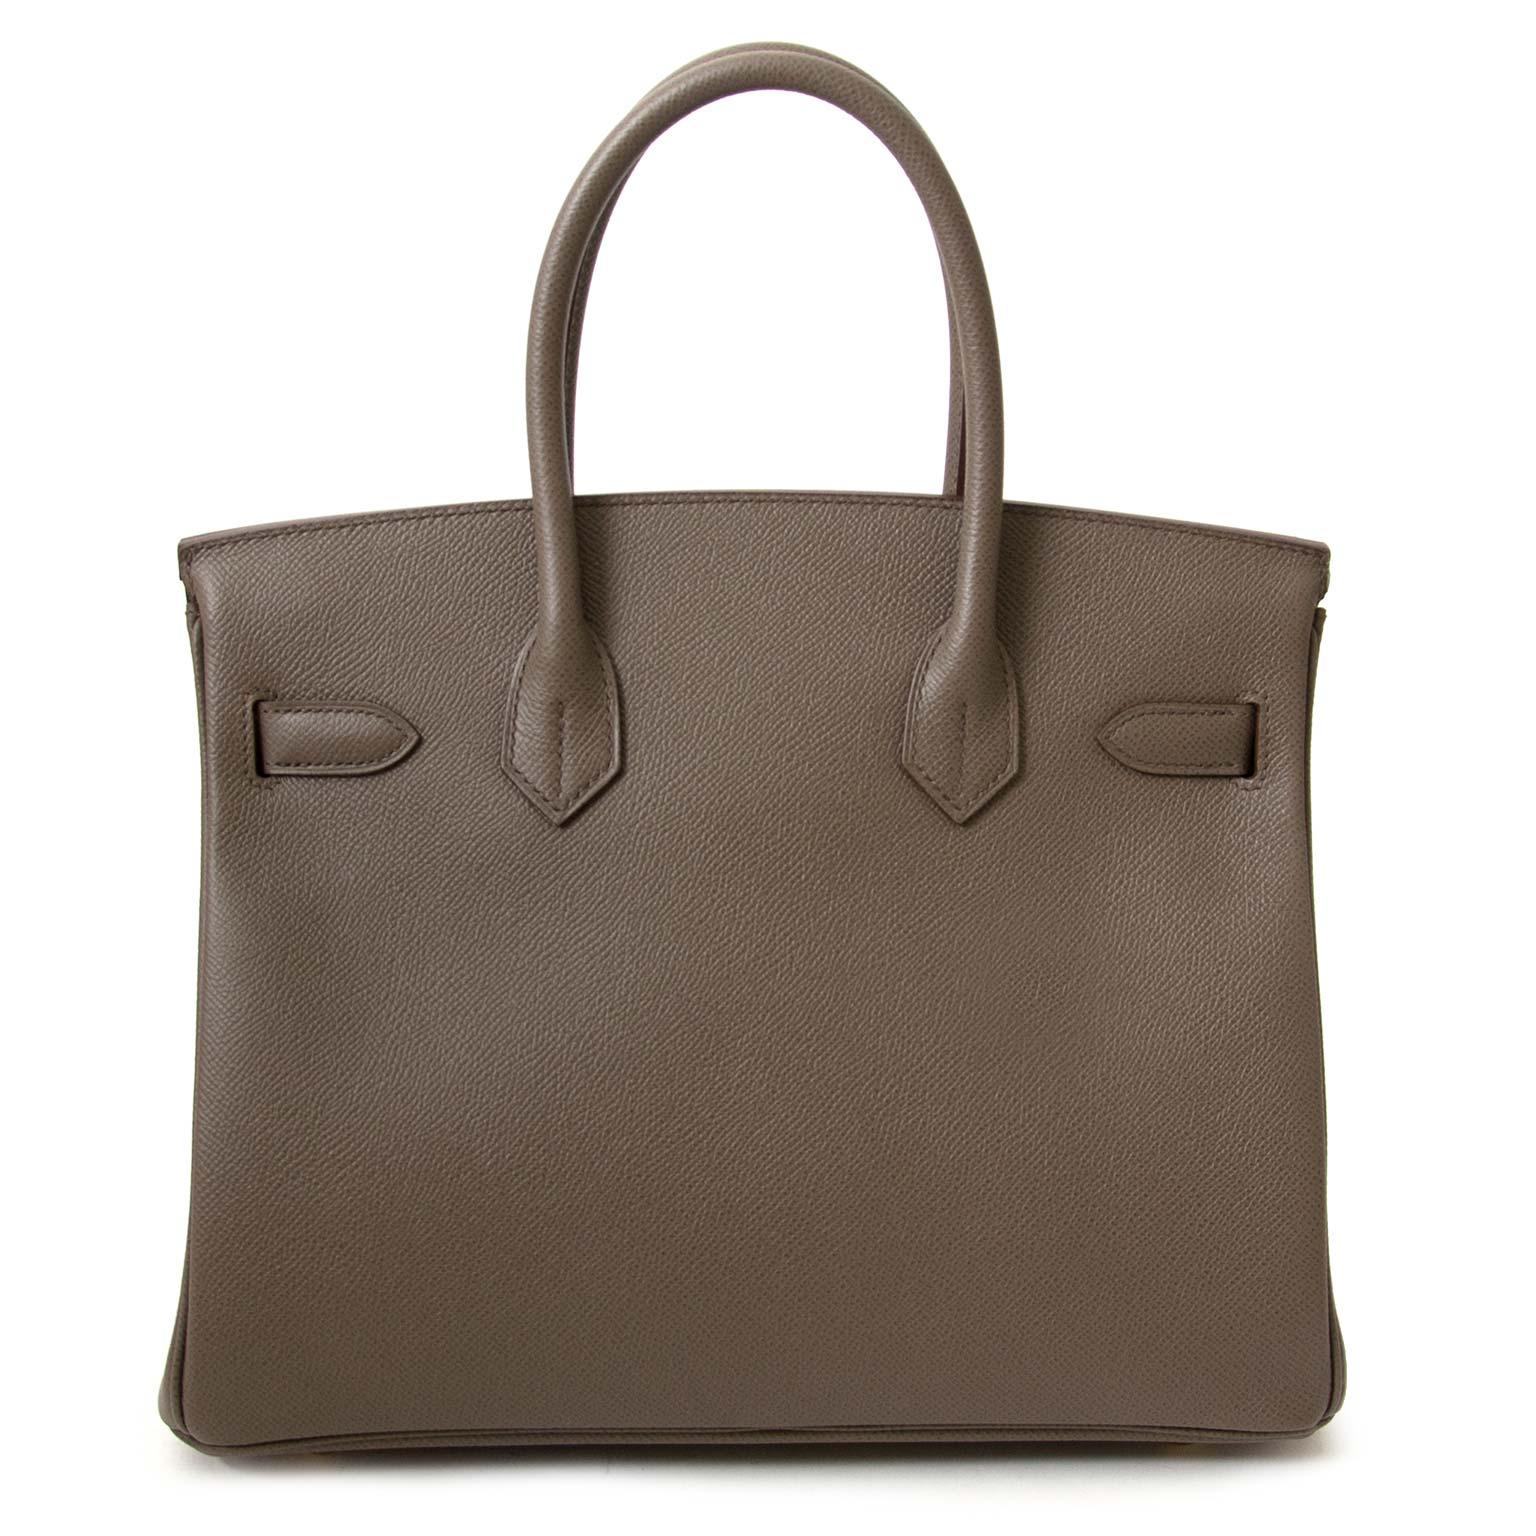 Brand New

Hermès Birkin 30 Epsom Gris Etain GHW

This Hermès Birkin bag comes in a beautiful Greyish color. The bag is crafted out of Epsom leather which is a very ridgid and structures leather type. It's almost 100% scratch resistant and holds its